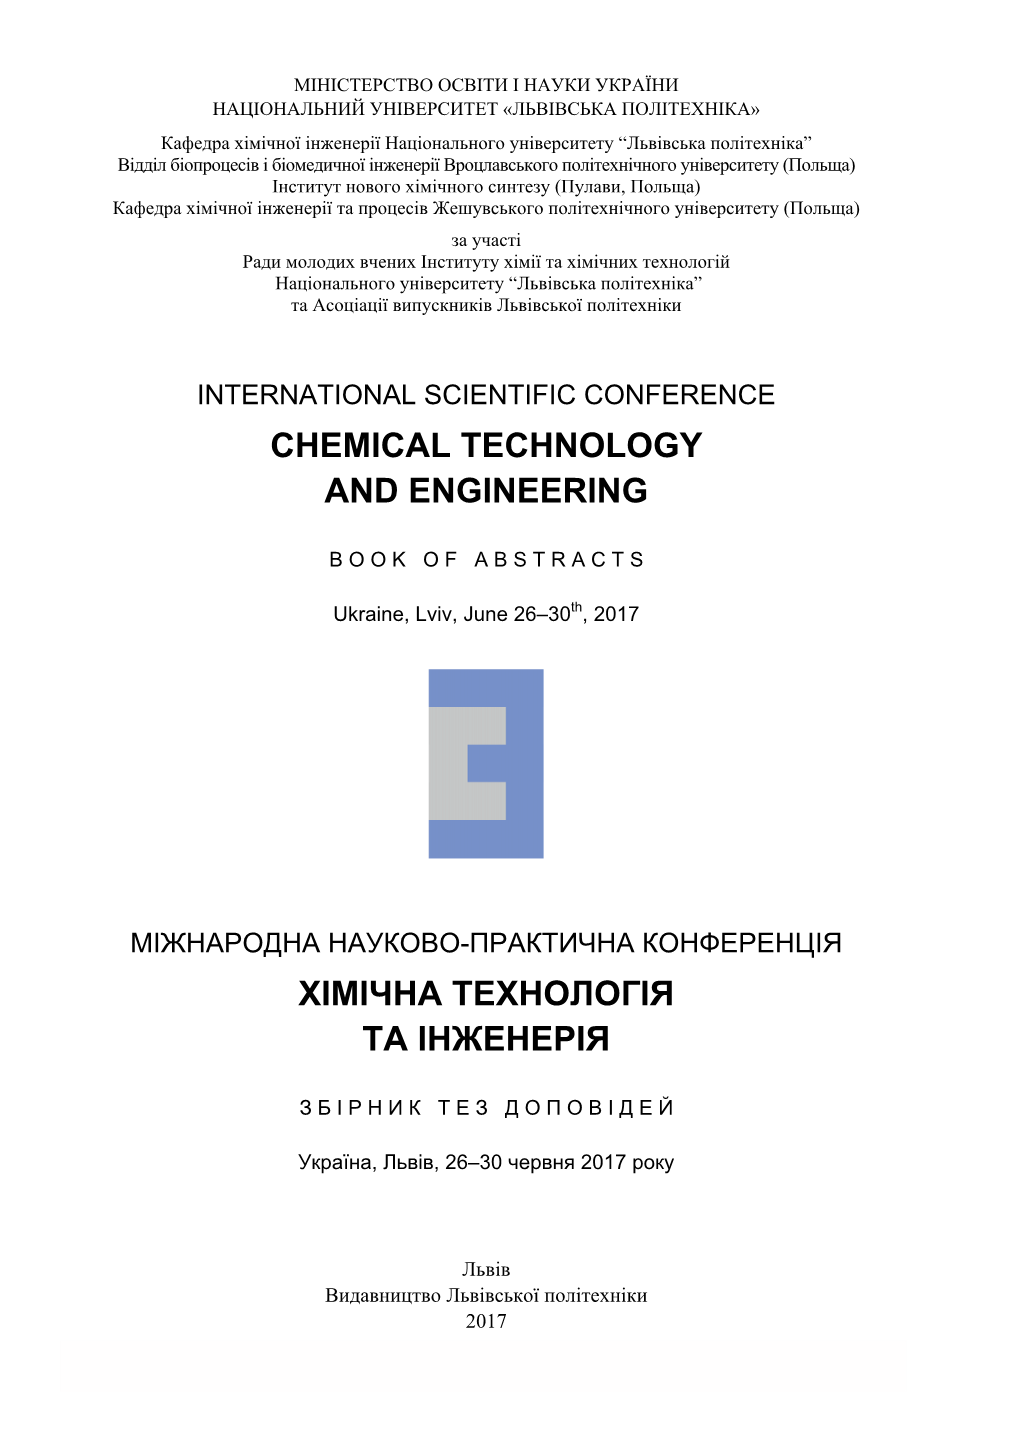 Chemical Technology and Engineering Хімічна